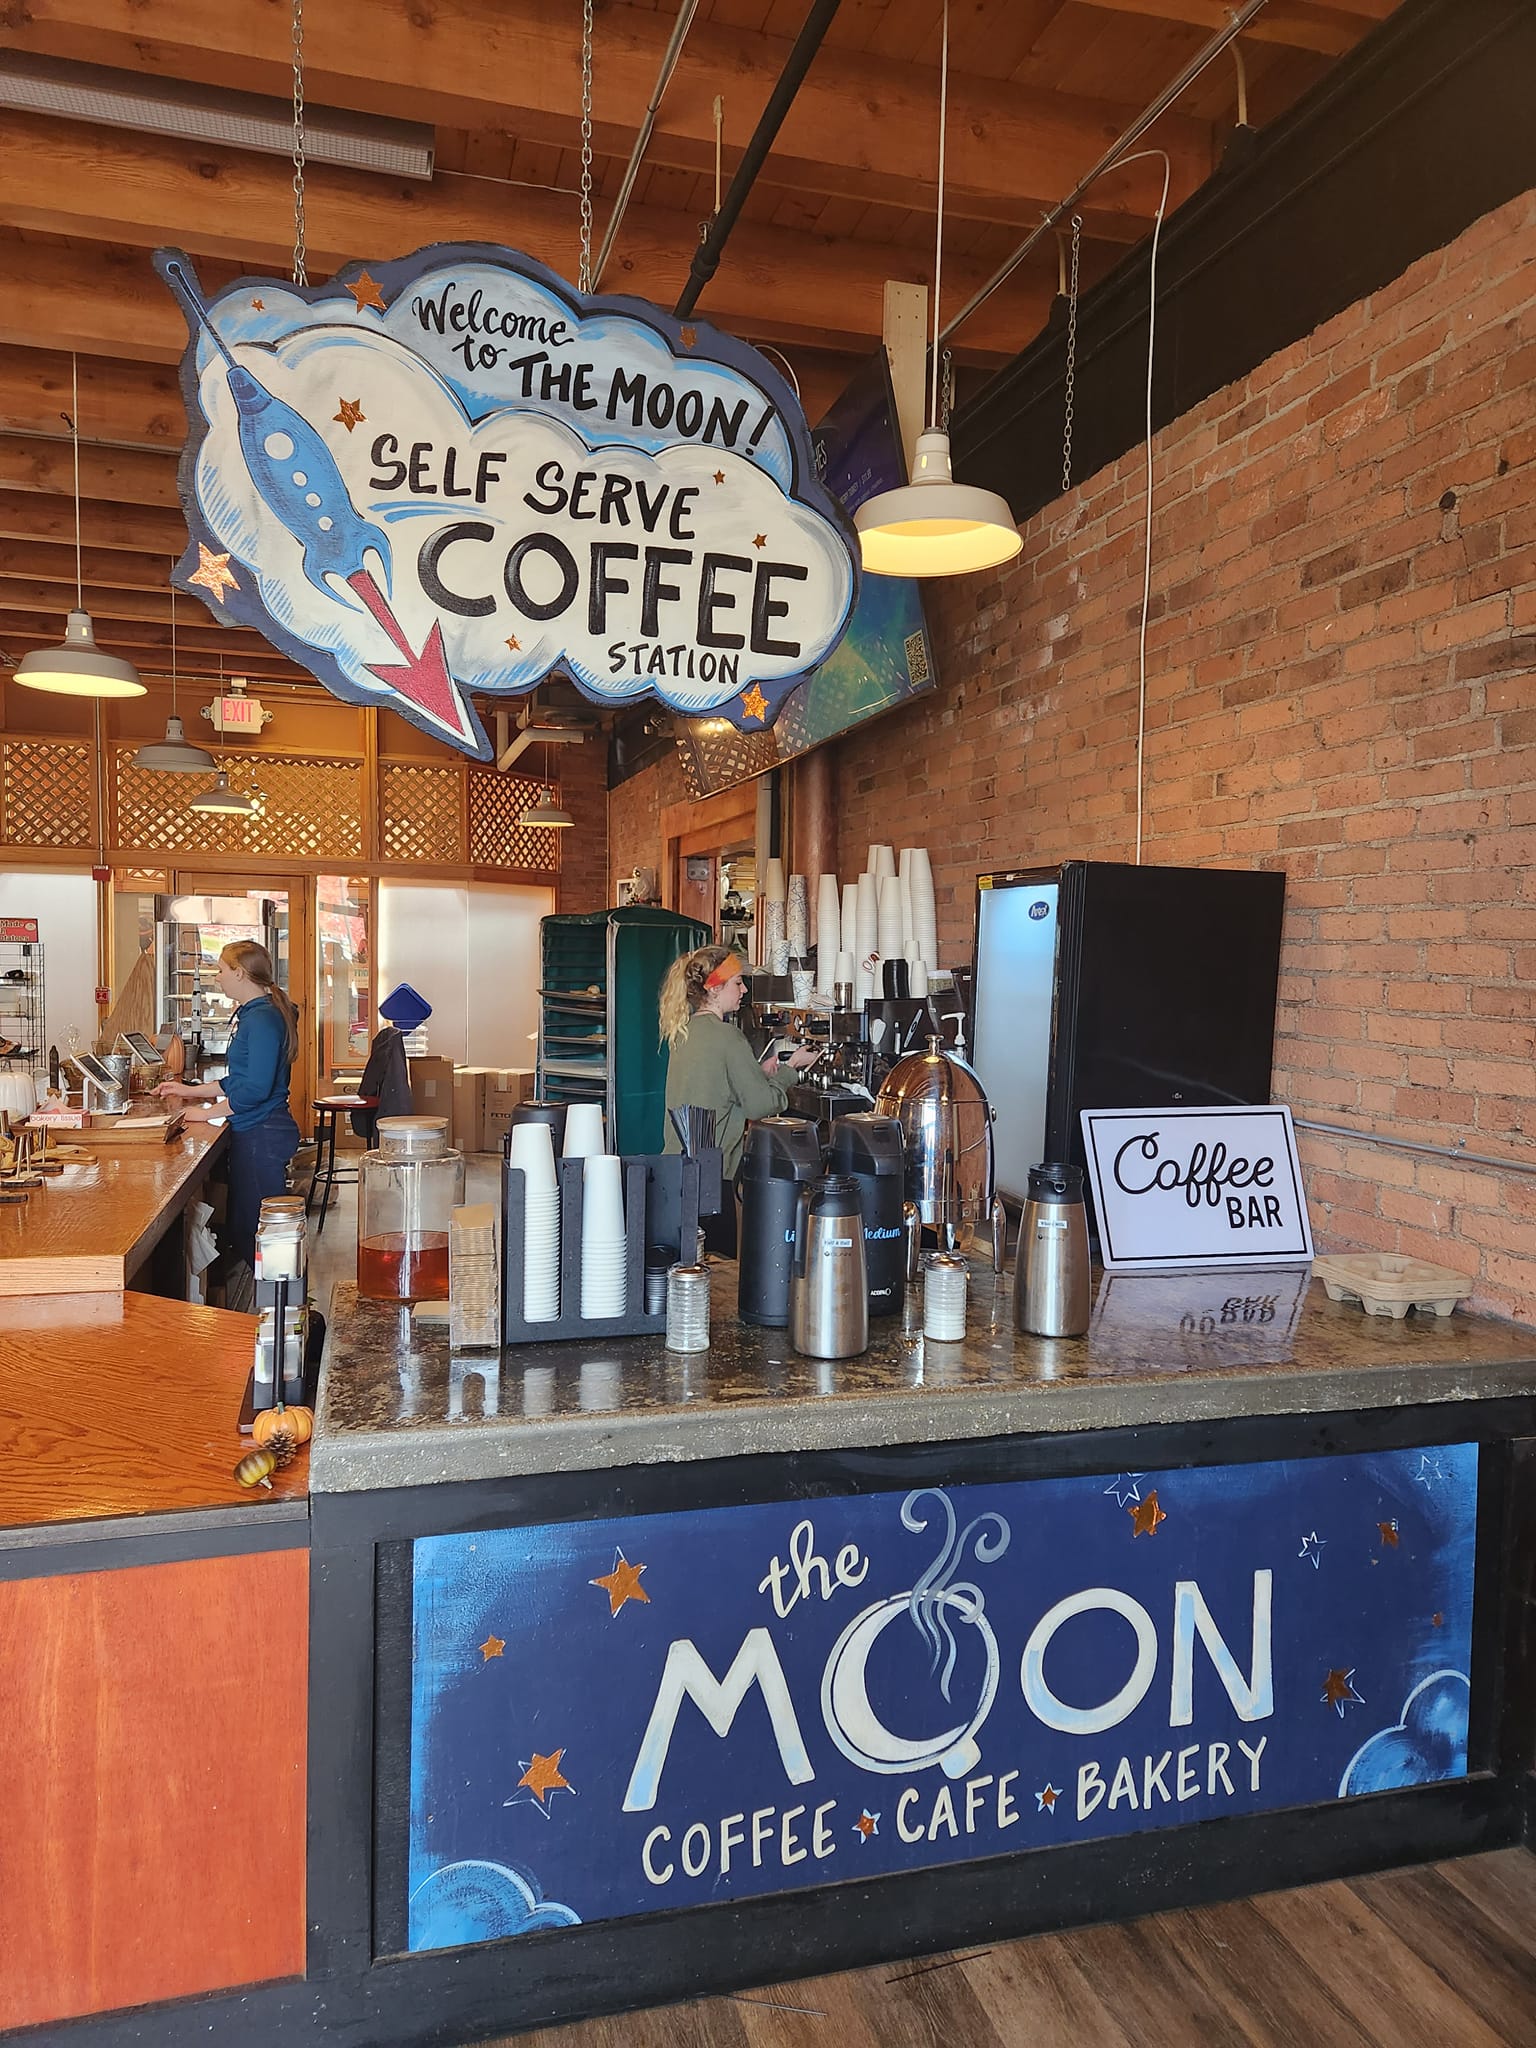 The Moon Cafe